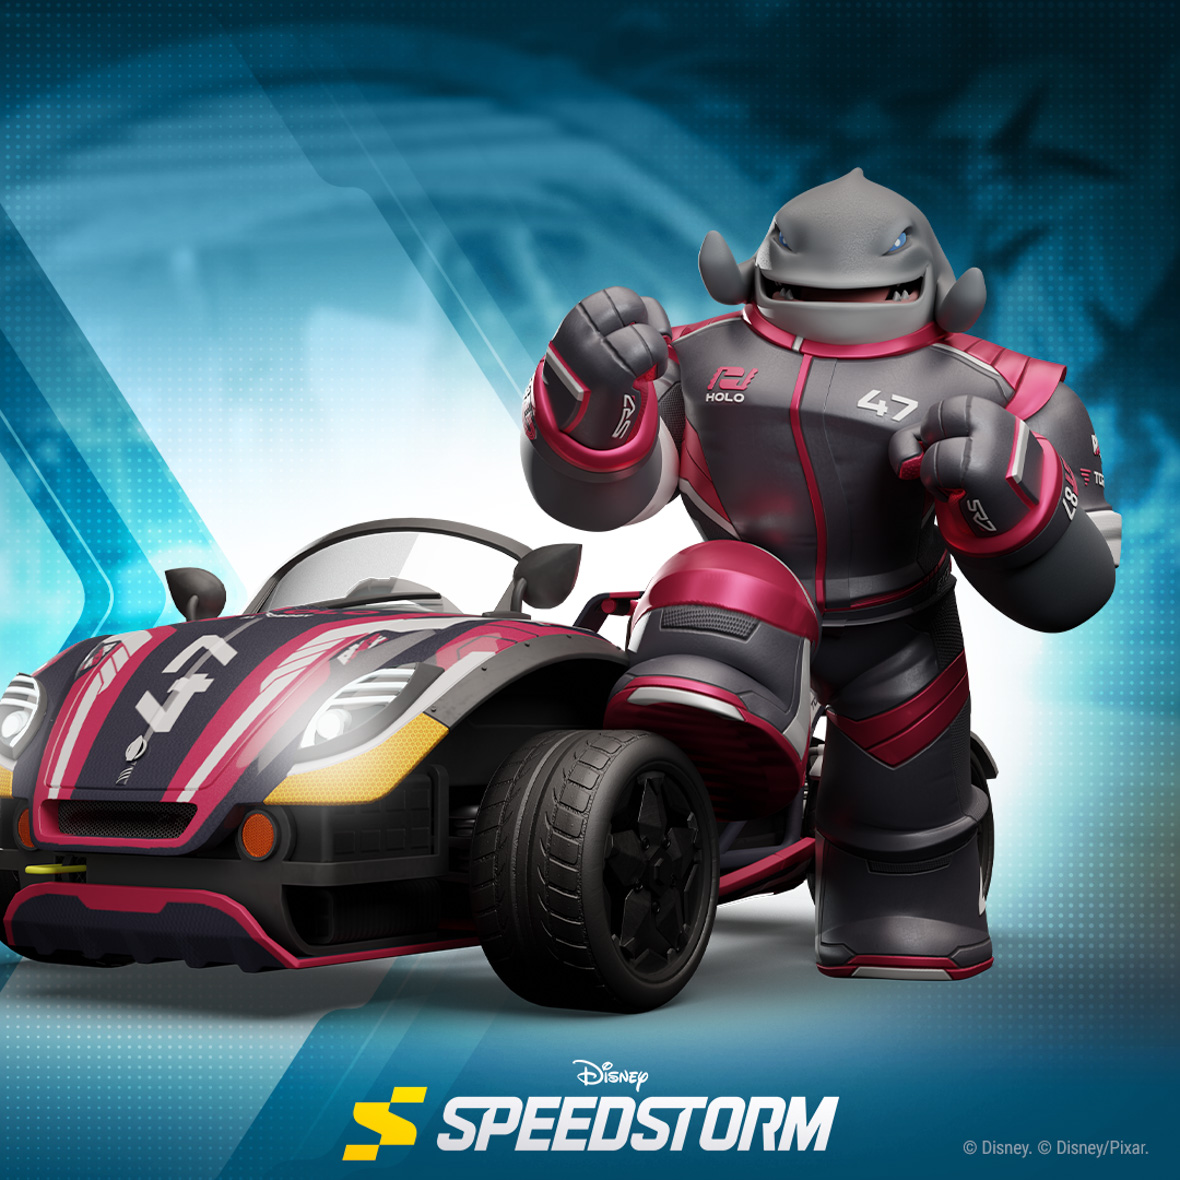 Gantu stands to the right of his race car, which is colored black and red to match his racing suit. He is smiling, his fists pumped in excitement, one foot balanced on the wheel of his car.